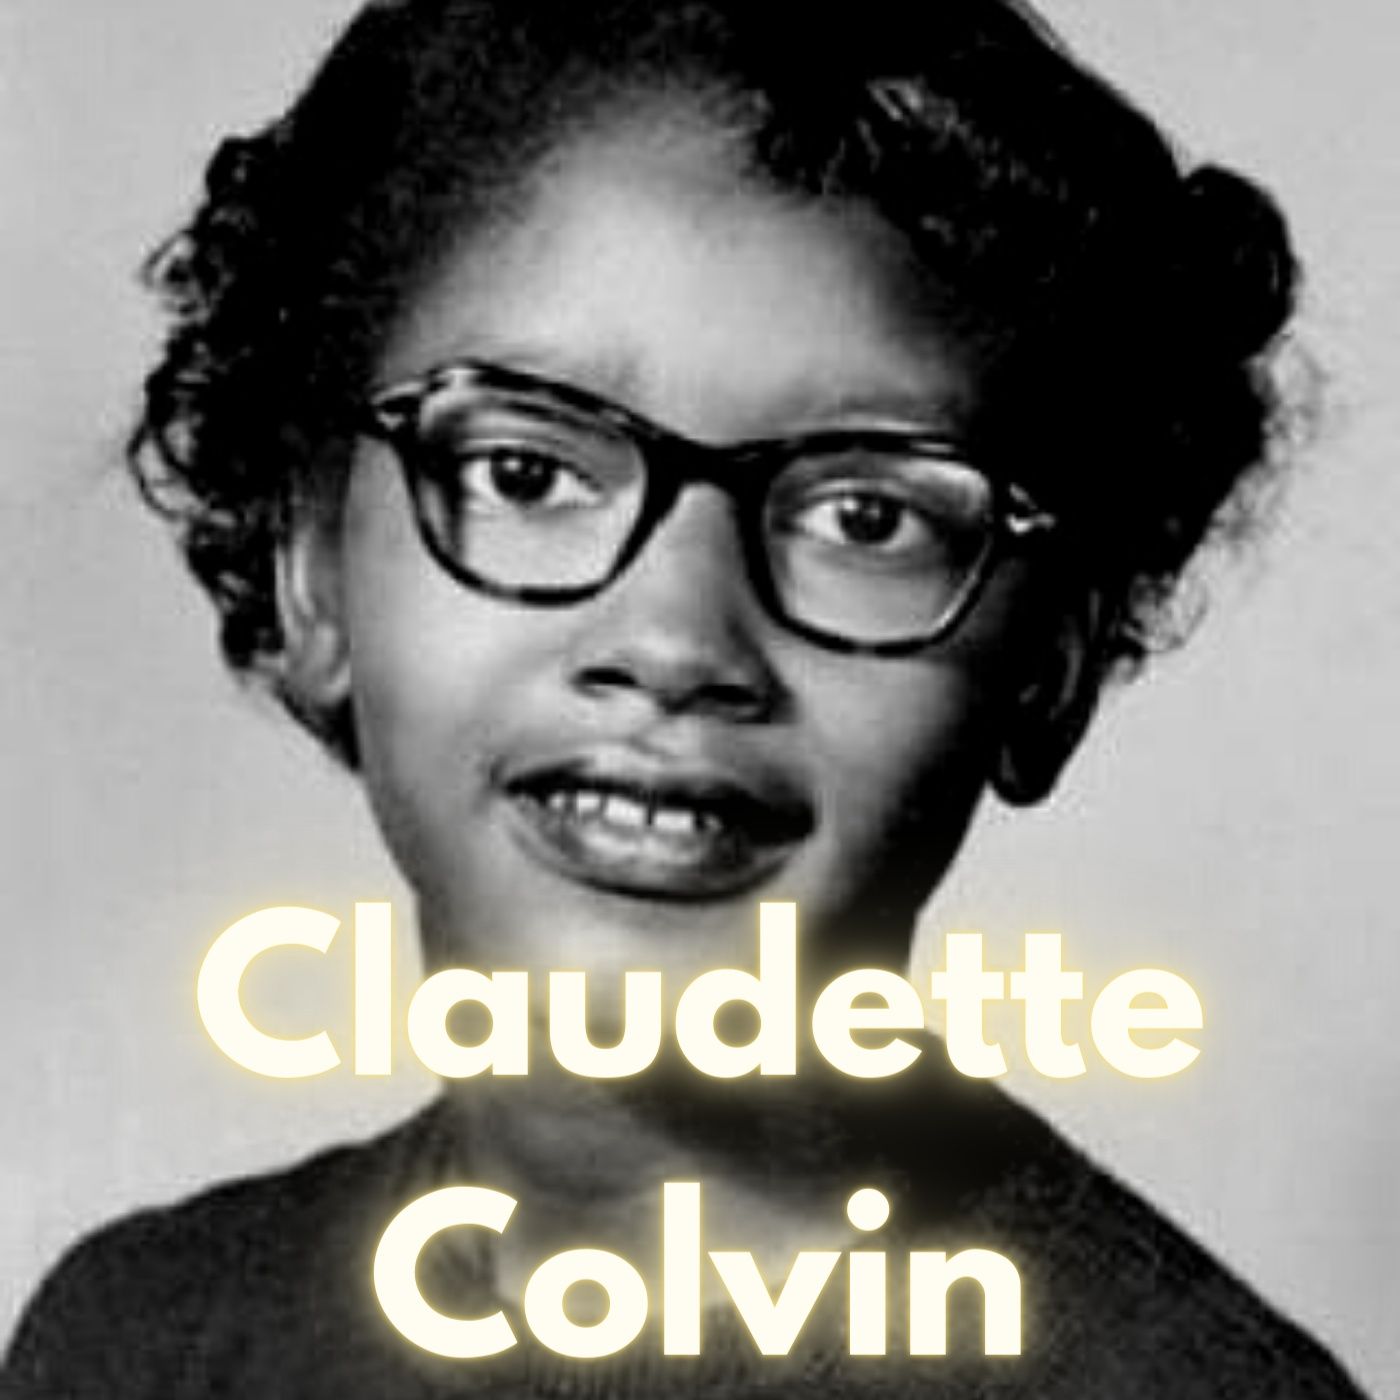 Lost in the Movement: The Story of Claudette Colvin